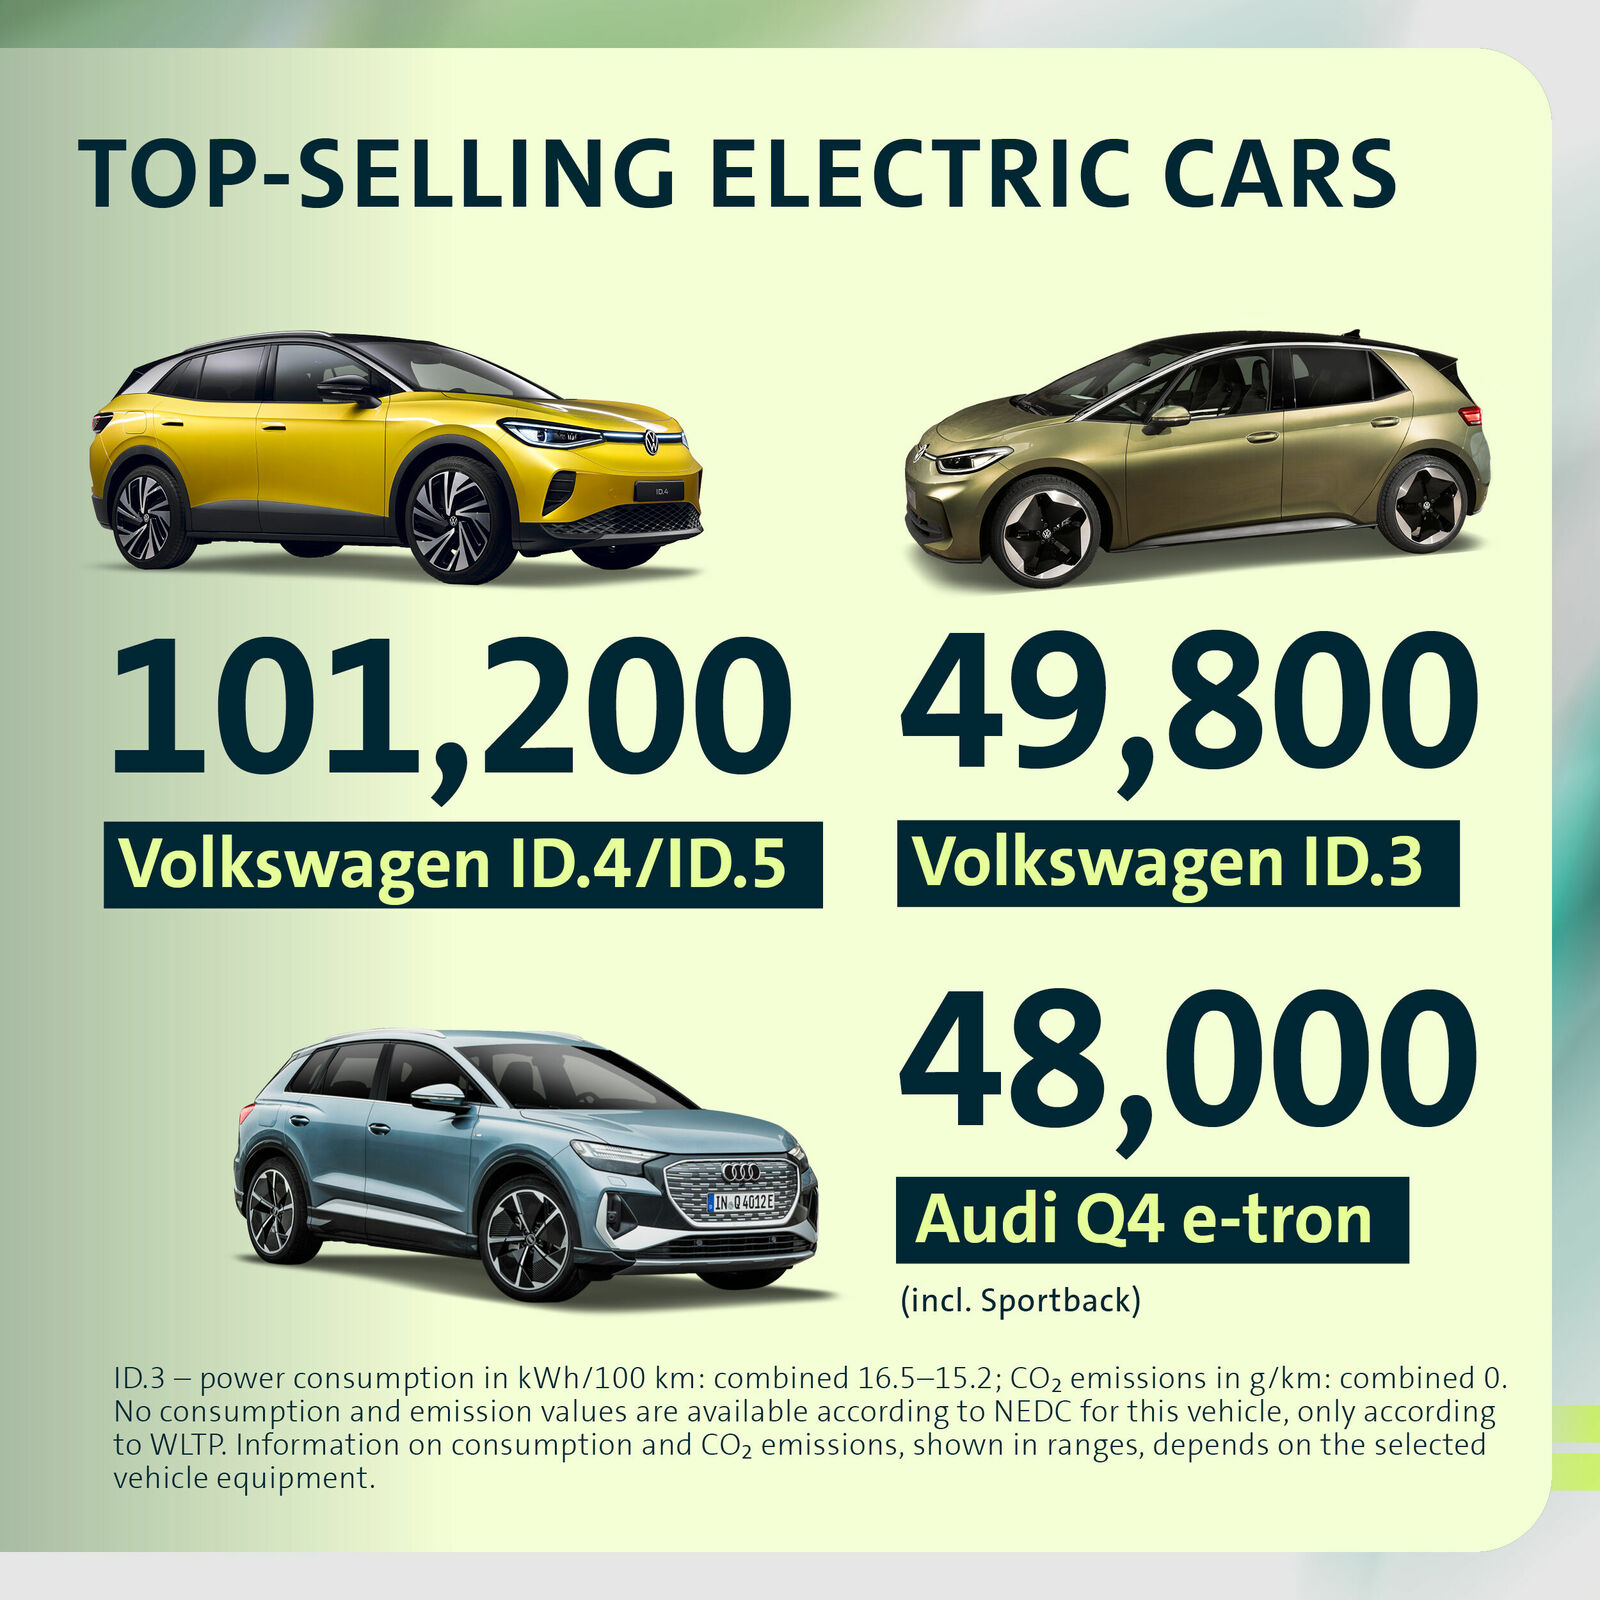 Top-Selling Electric Cars